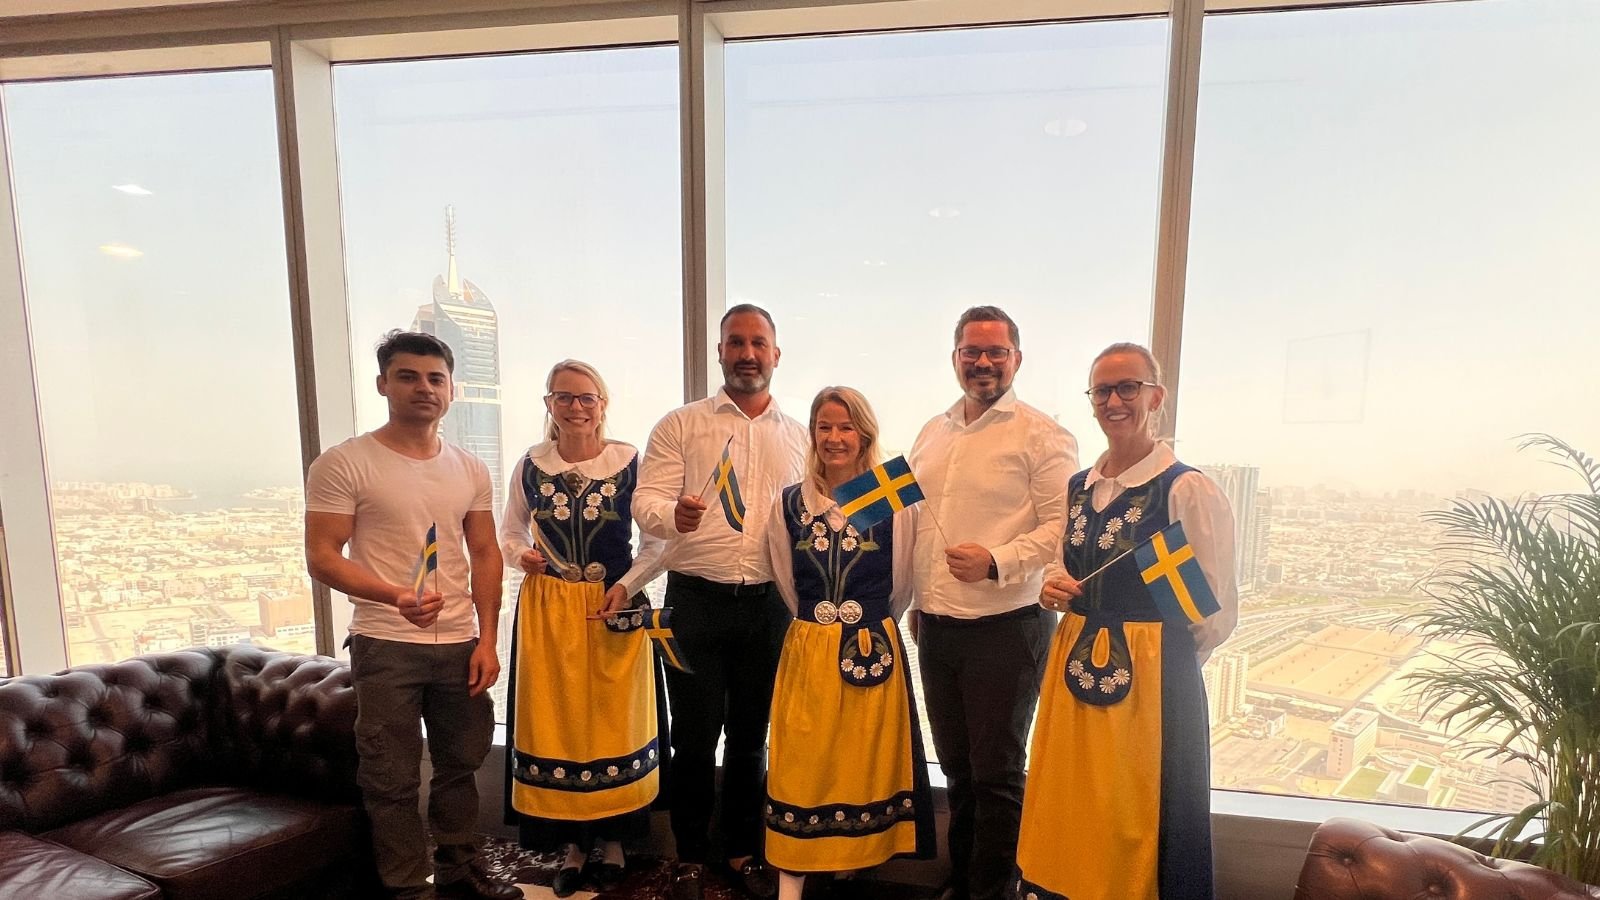 Swedish Business Council UAE directors dressed in Swedish national dresses visit the Várri Consultancy team. They're holding small Swedish flags.